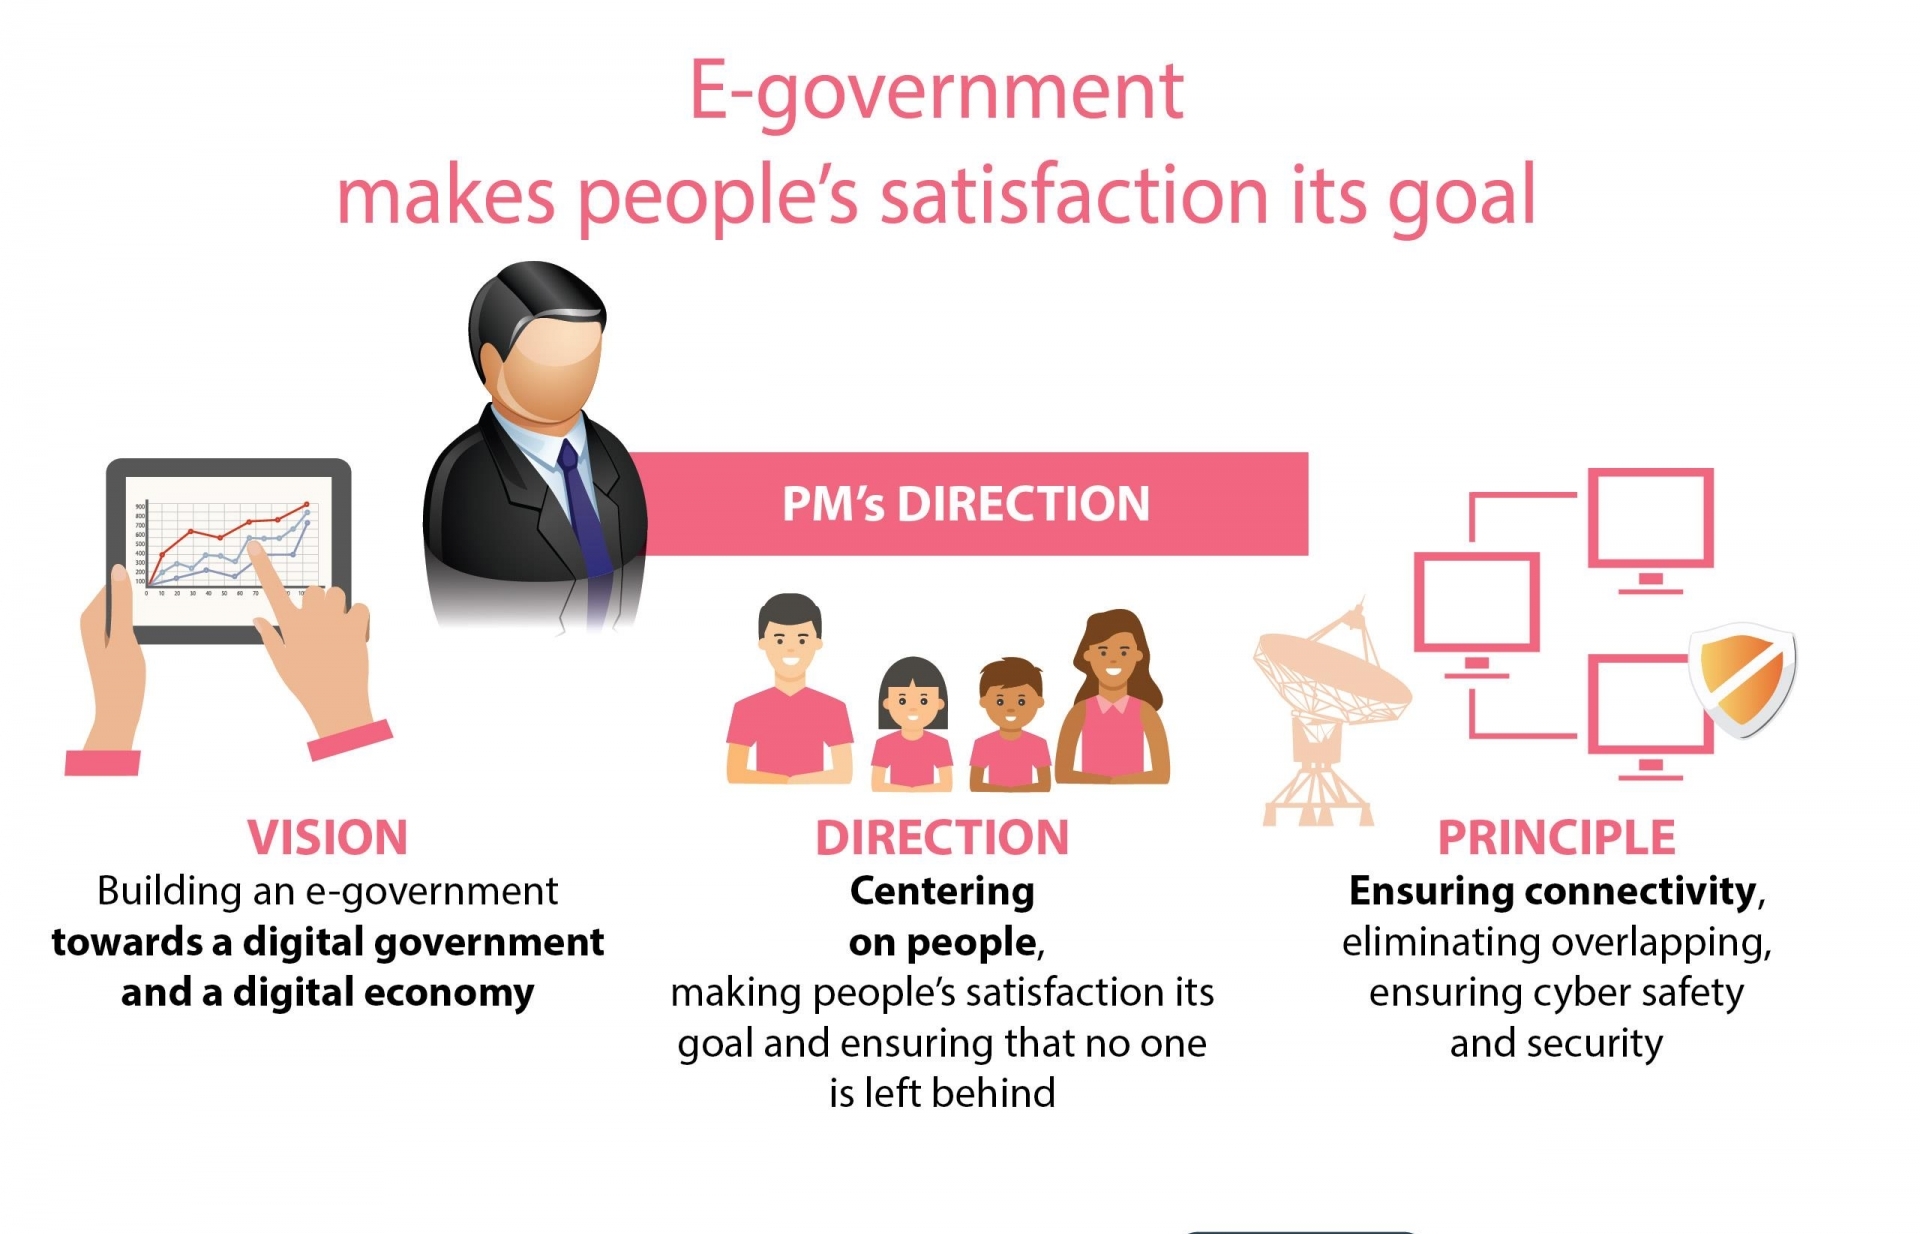 E-government makes people’s satisfaction its goal